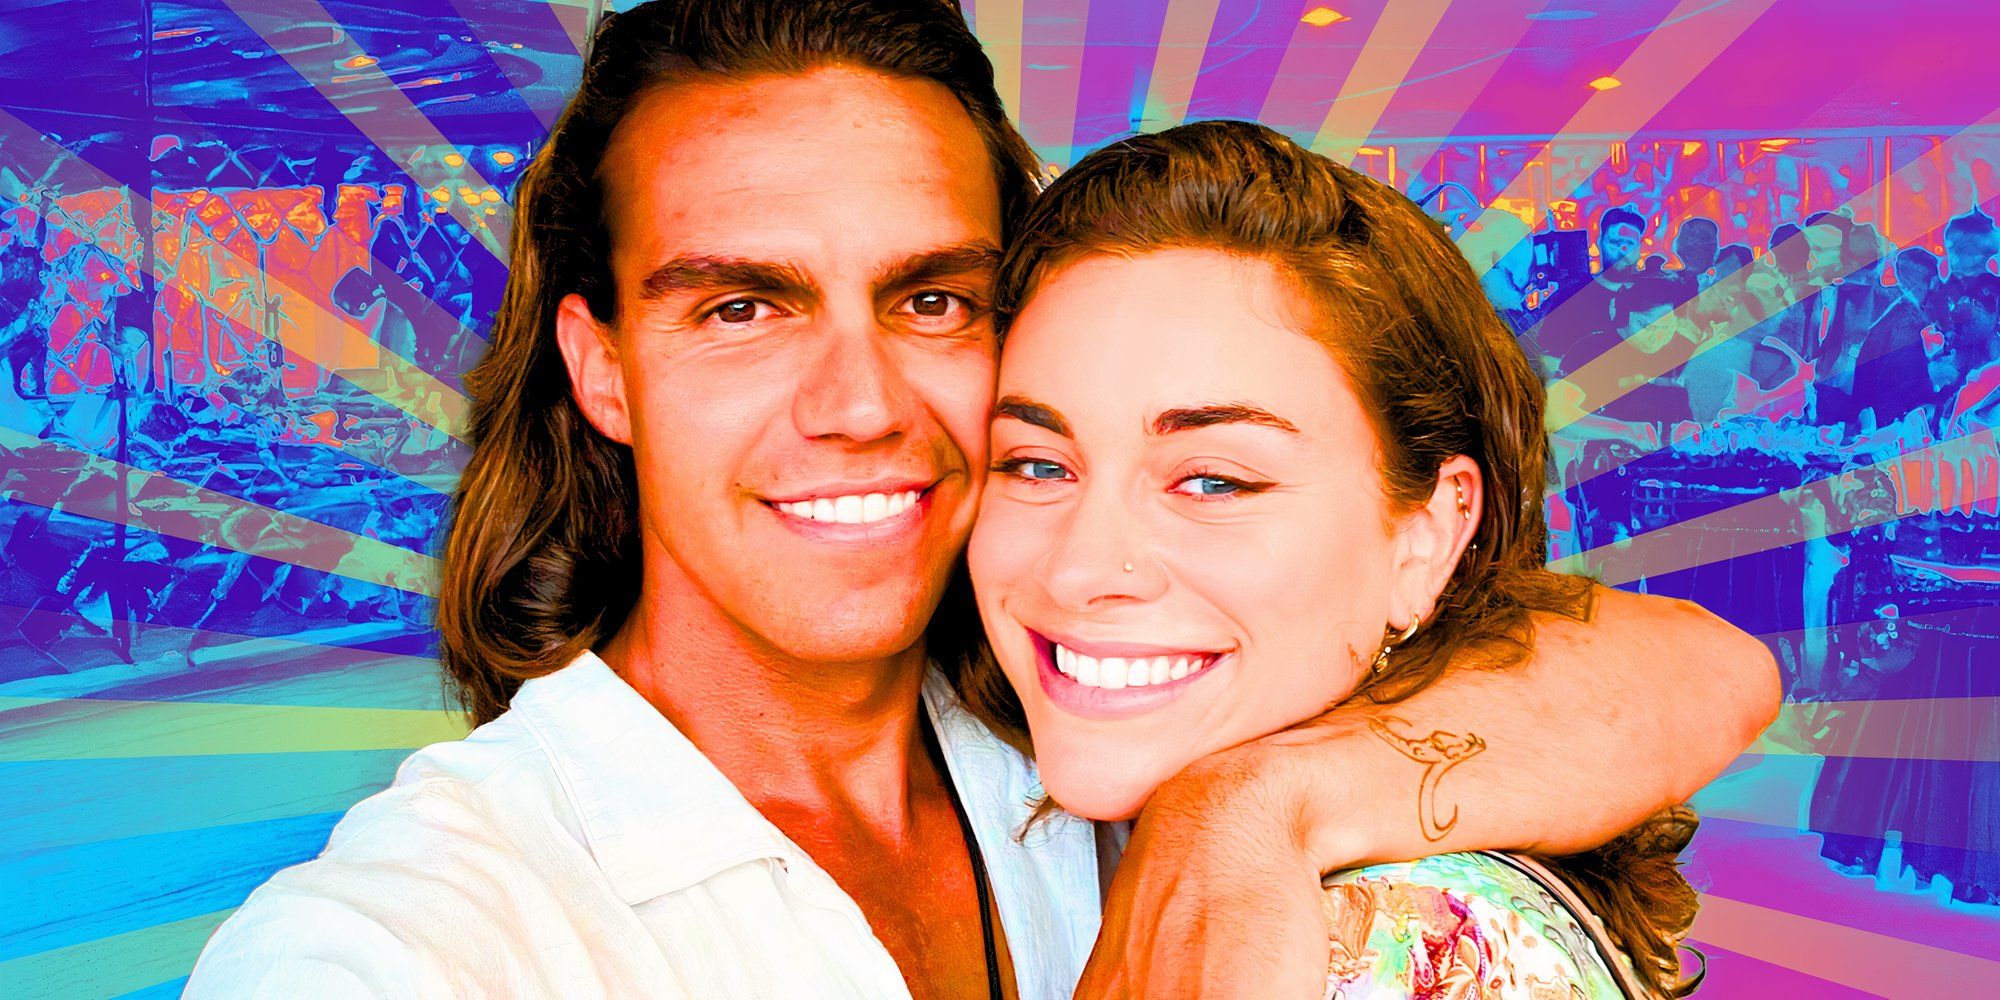  Ben and Sunny hugging and smiling from below deck multicolored background